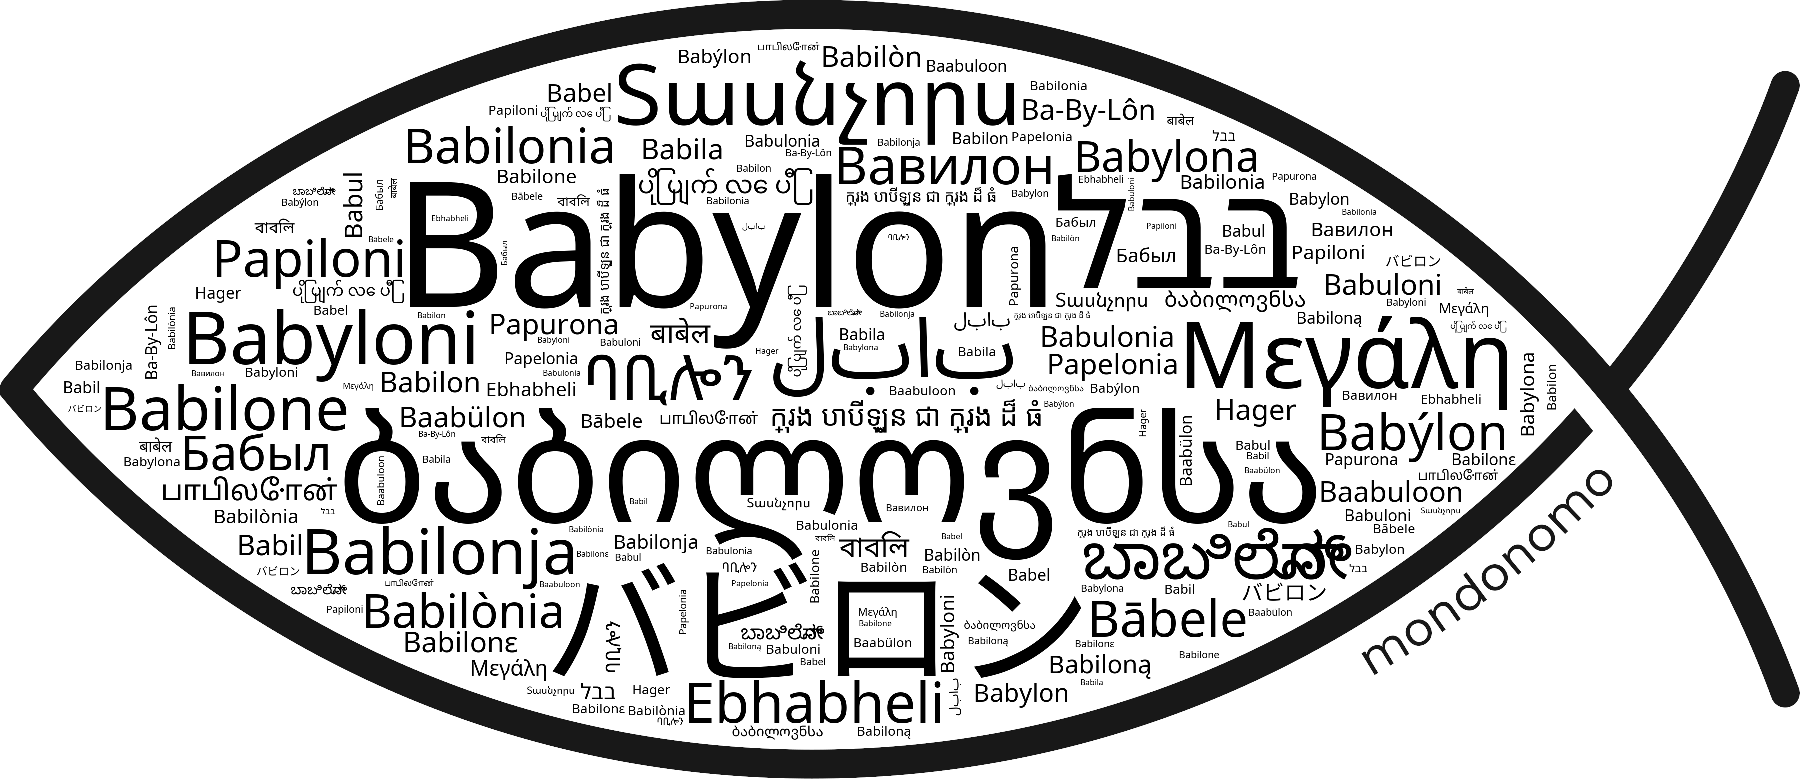 Name Babylon in the world's Bibles